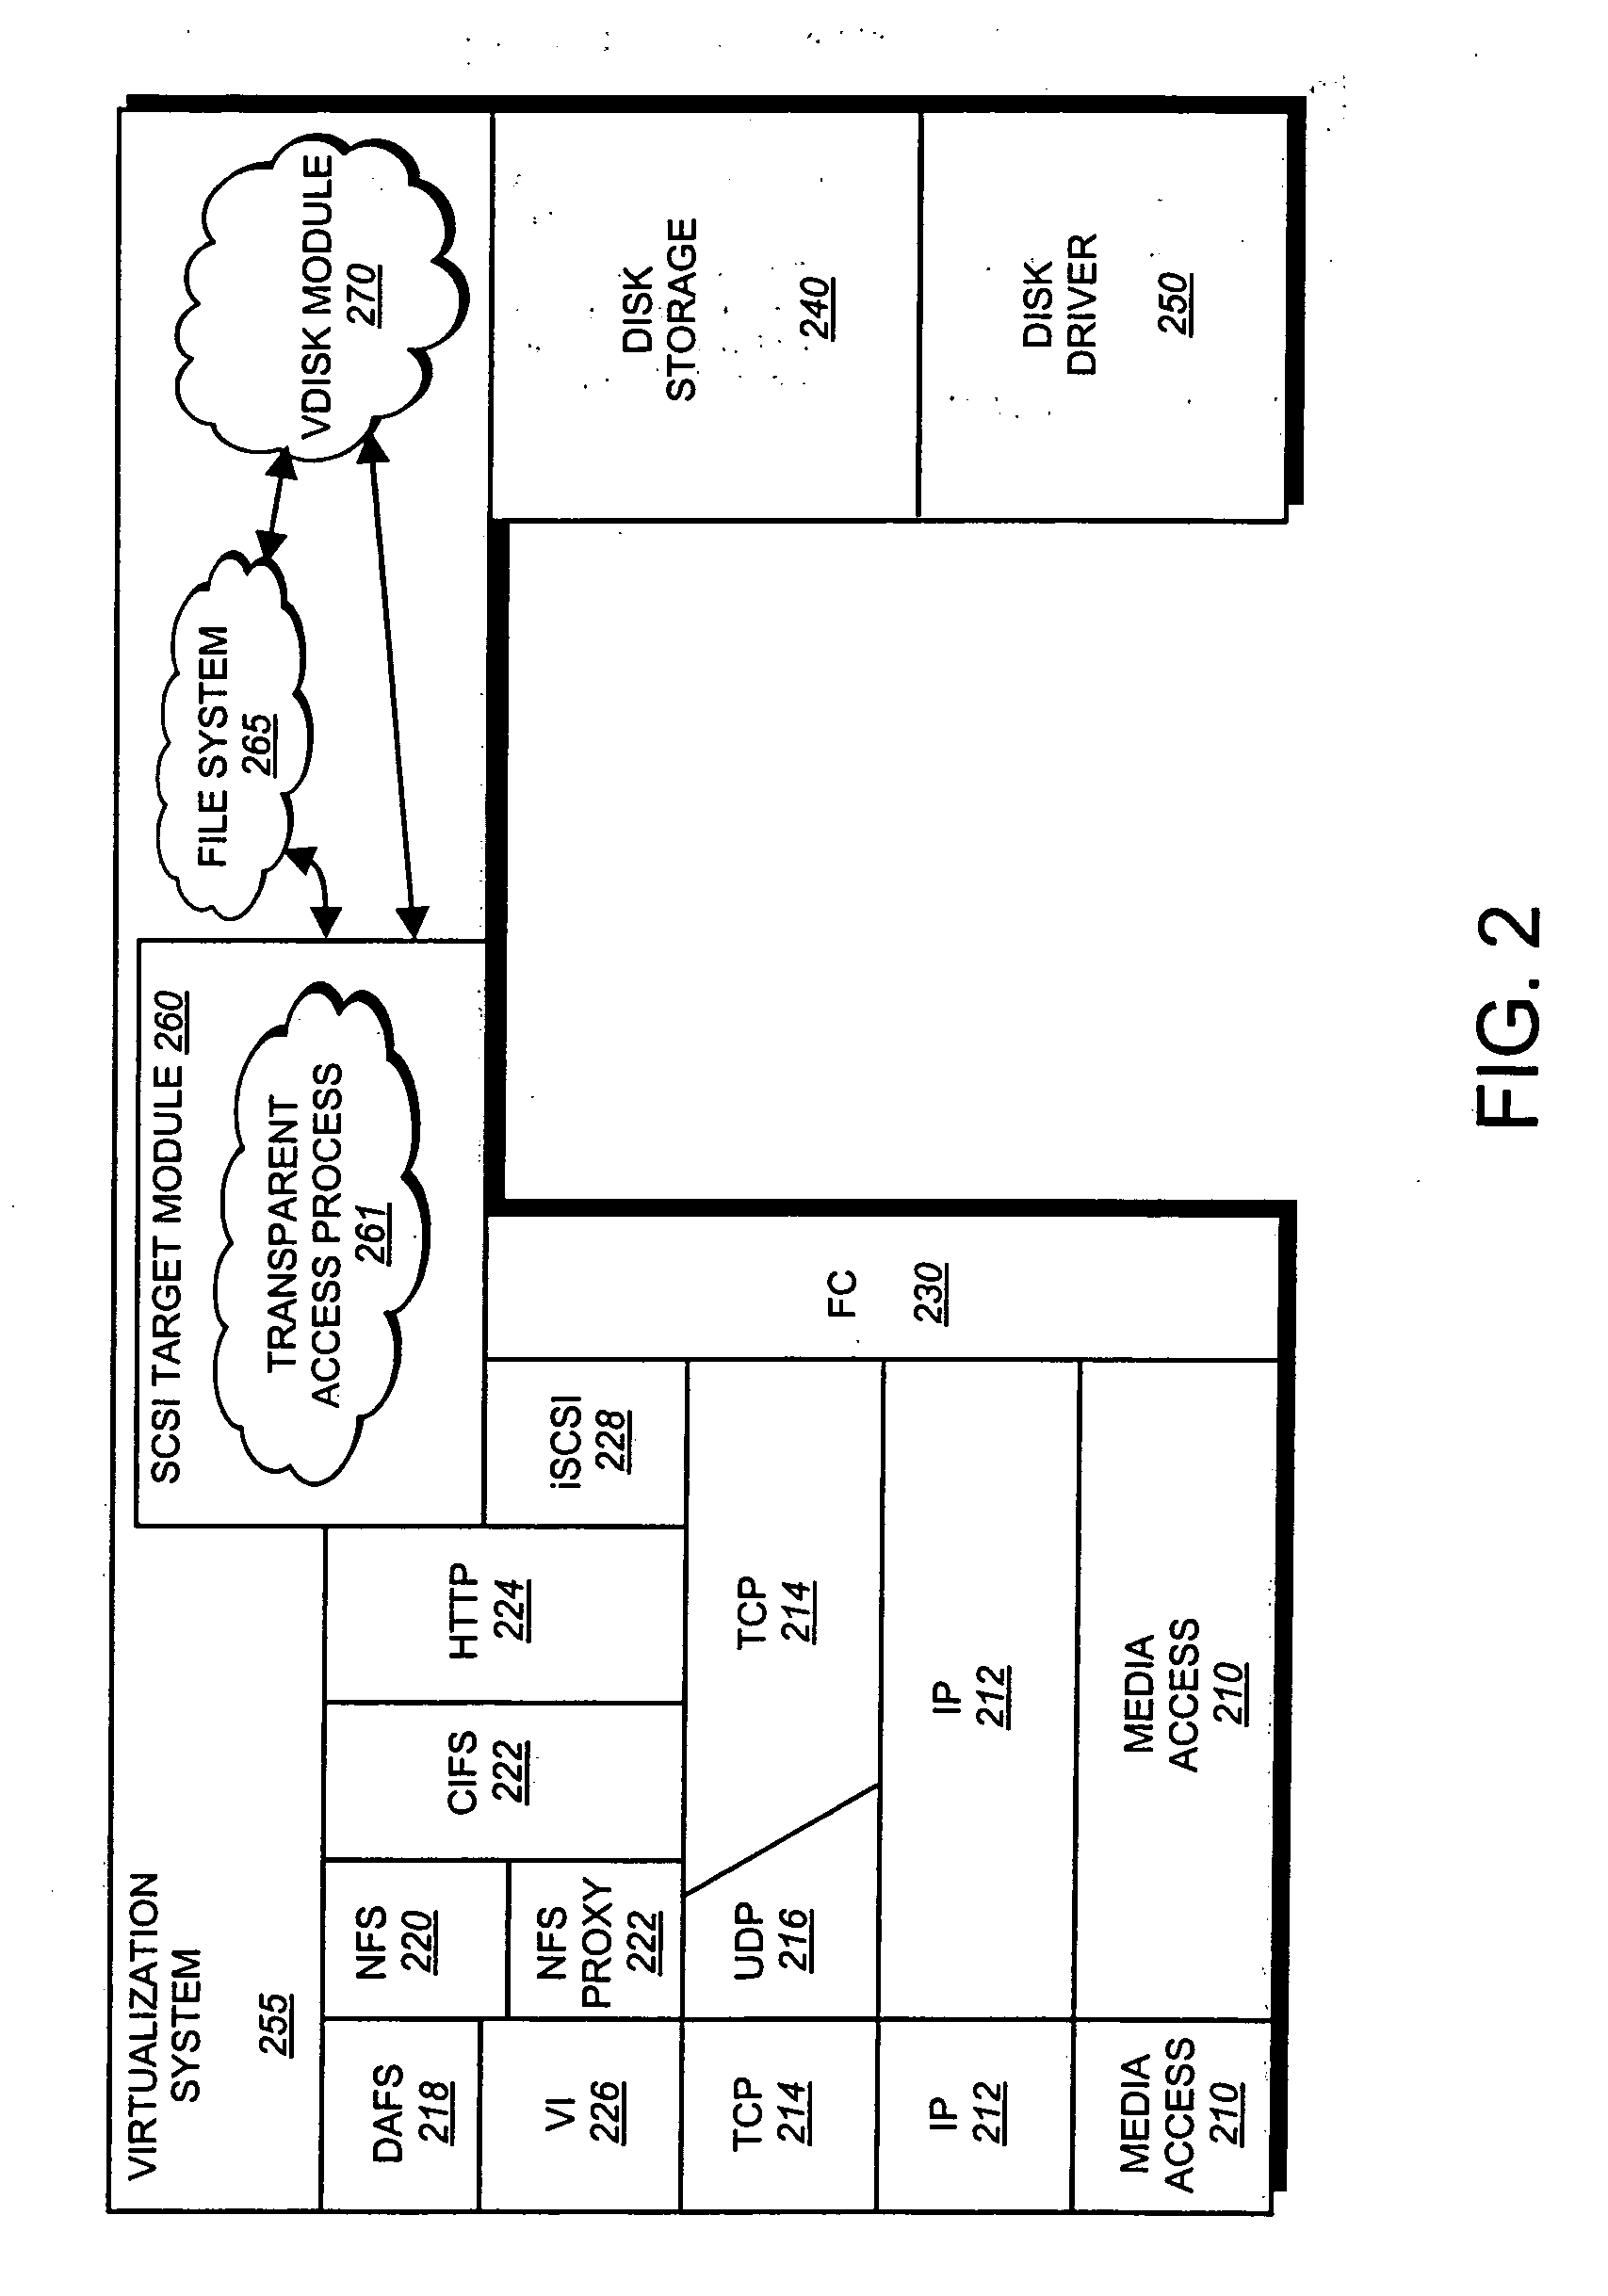 System and method for transparently accessing a virtual disk using a file-based protocol